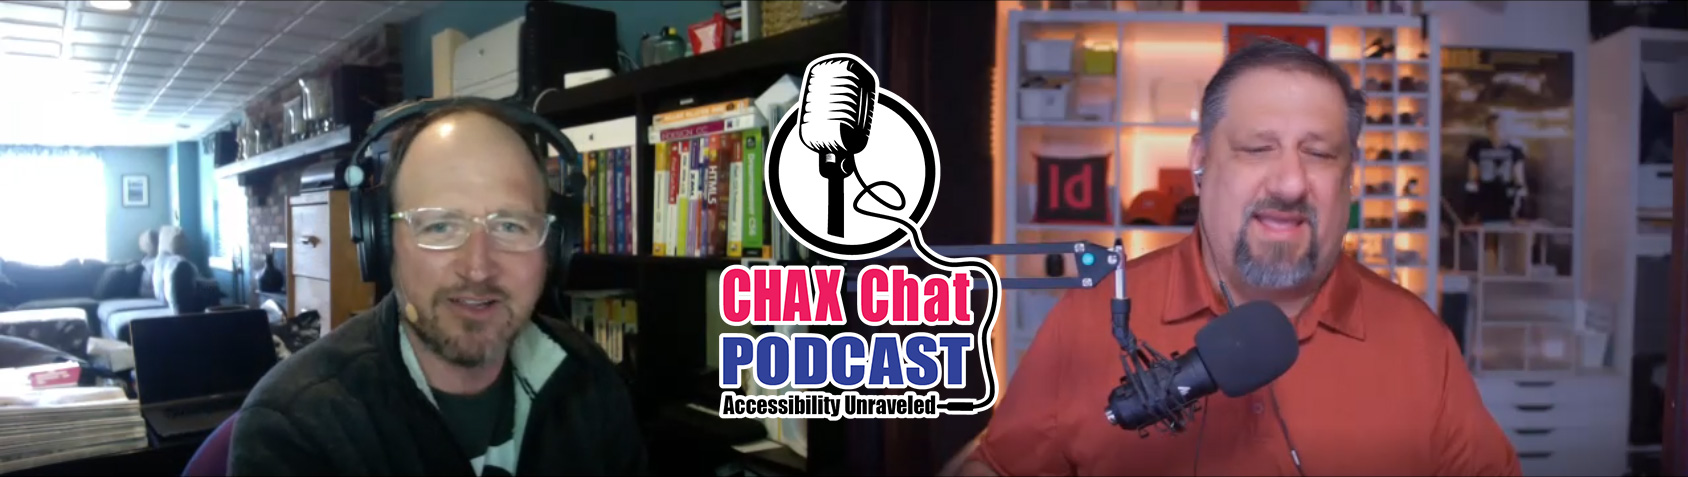 Chad Chelius and Dax Castro during an Accessibility Podcast with the Chax Chat Logo between them.